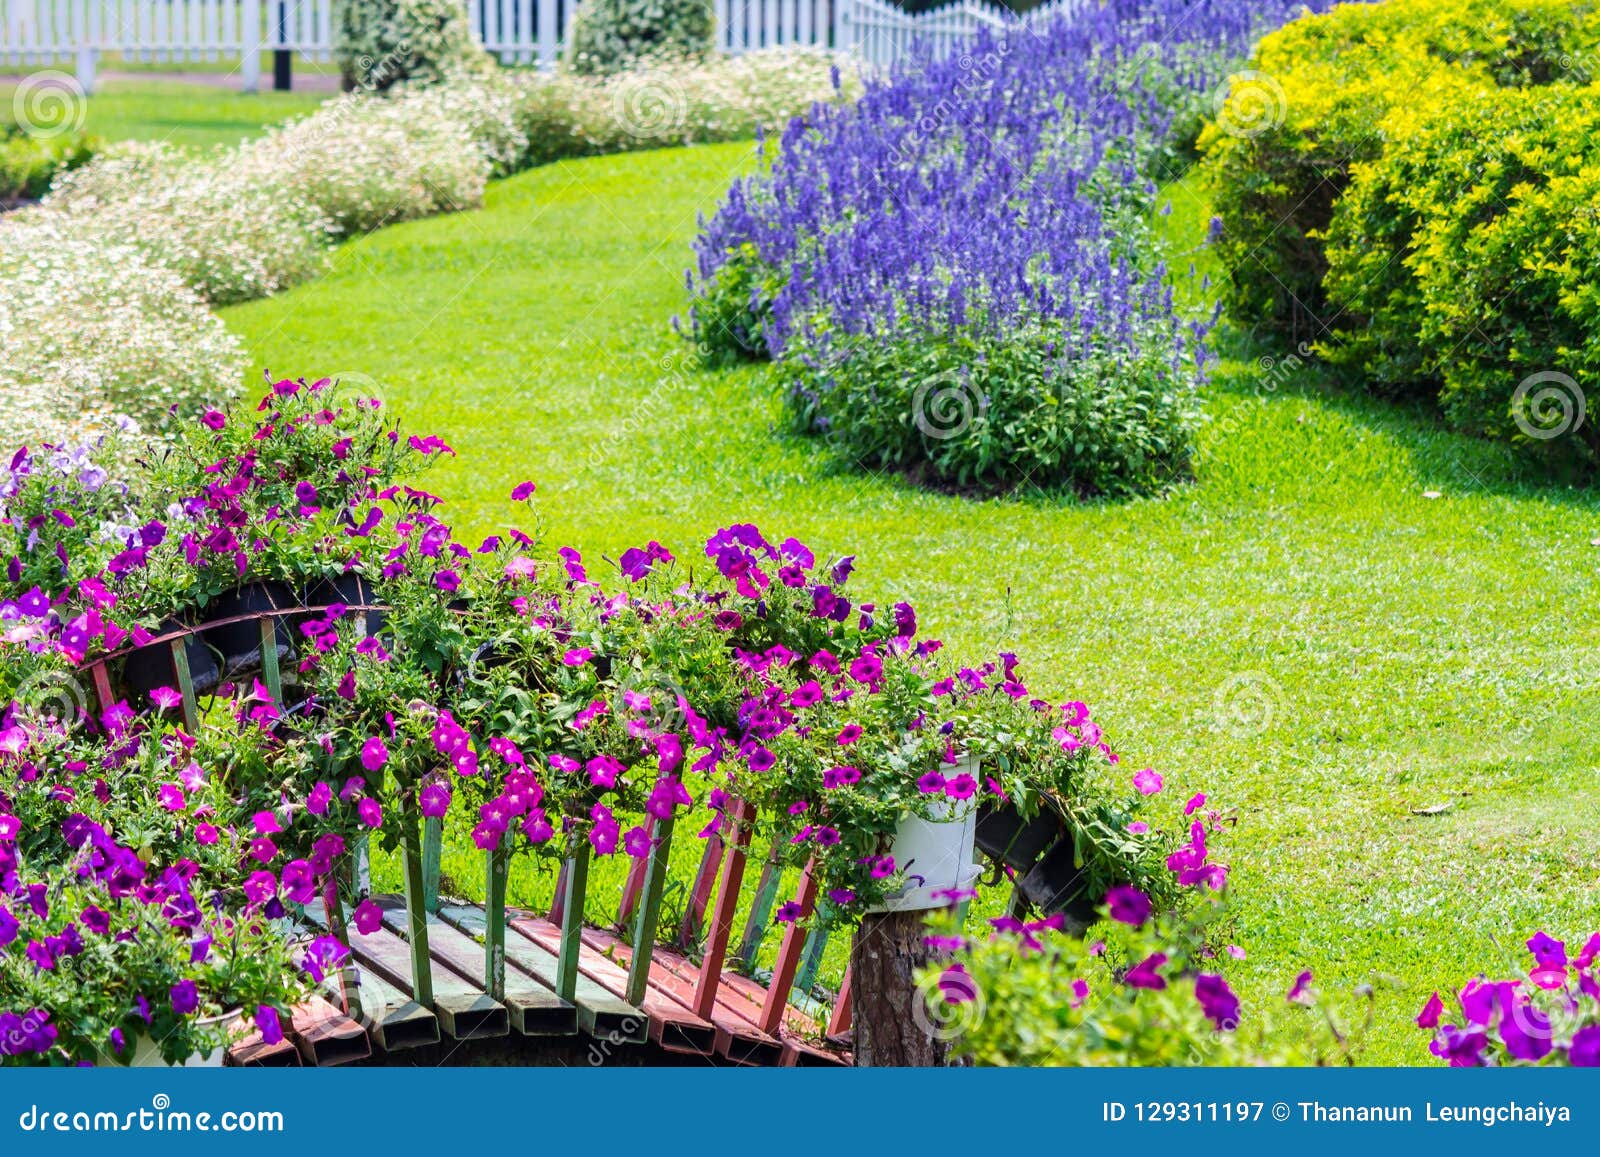 concept and idea cozy home flower garden on summer. stock image